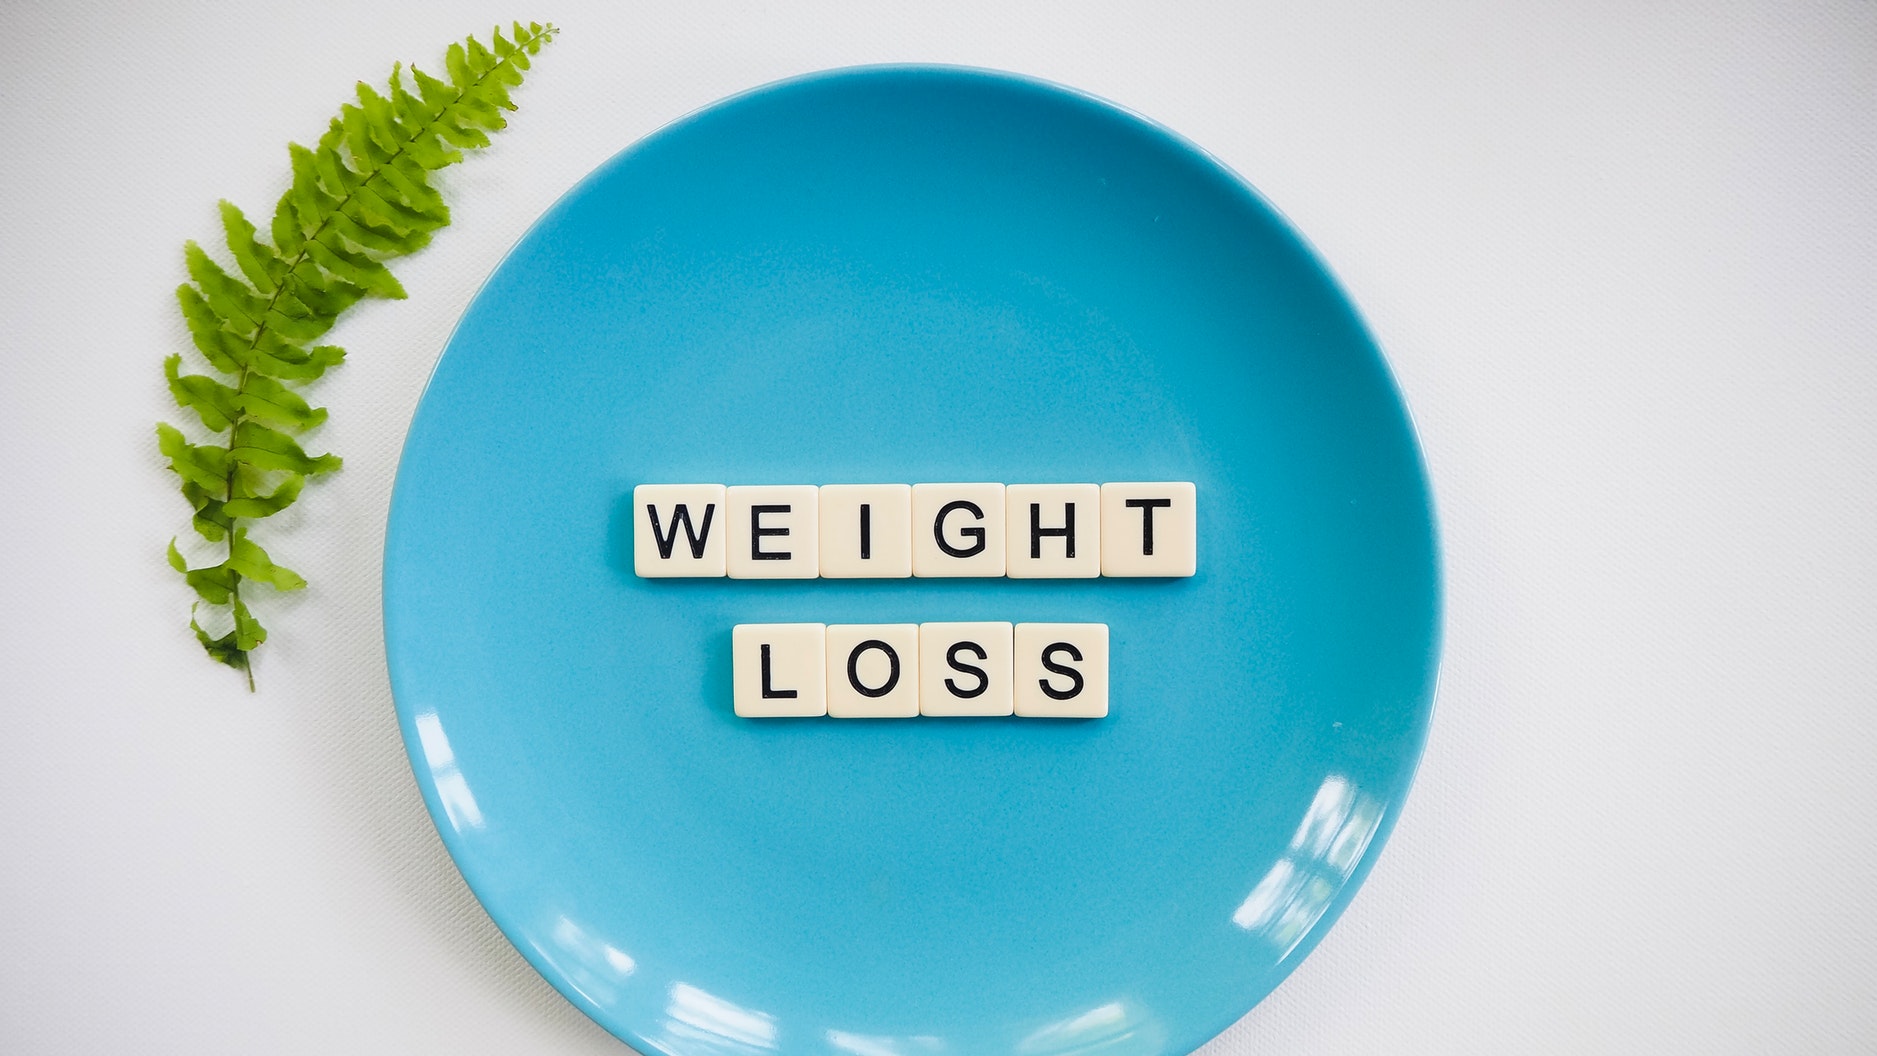 weight loss on plate